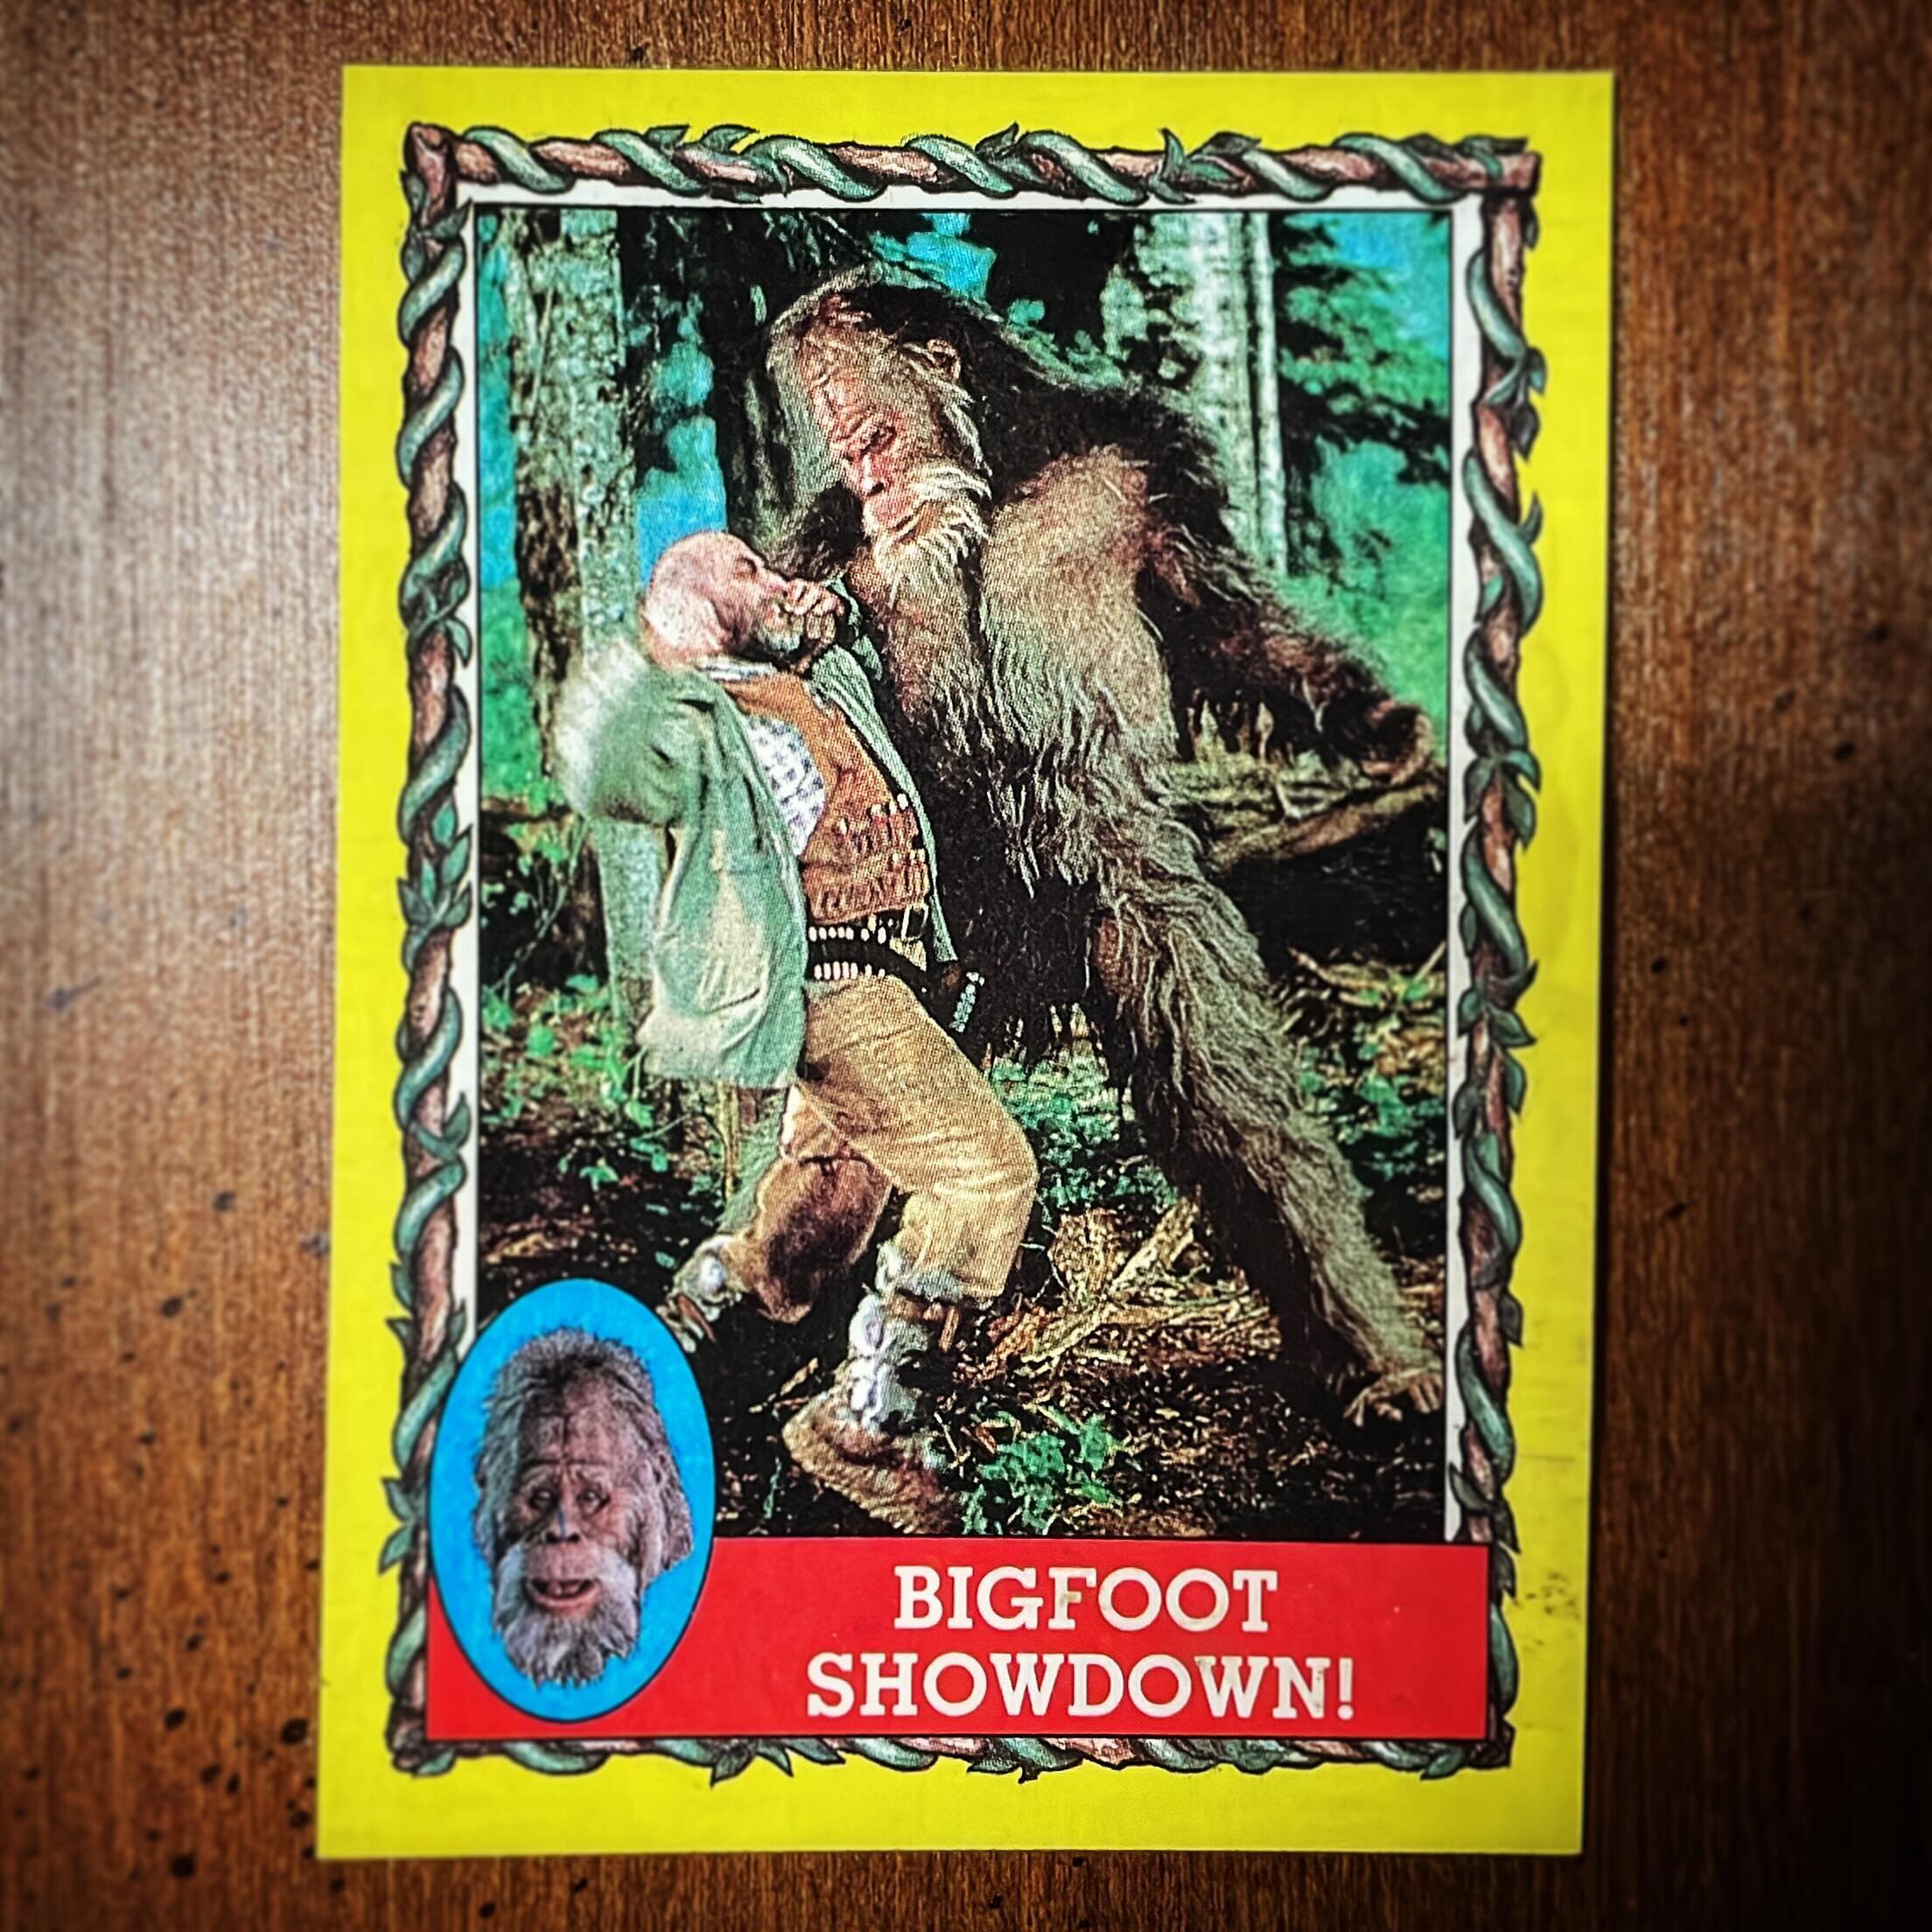 &ldquo;What&rsquo;s one thing you never leave home without?&rdquo;
Easy, my &lsquo;Bigfoot Showdown&rsquo; card from the Topps 1987 Harry and The Hendersons movie trading card set. Duh.